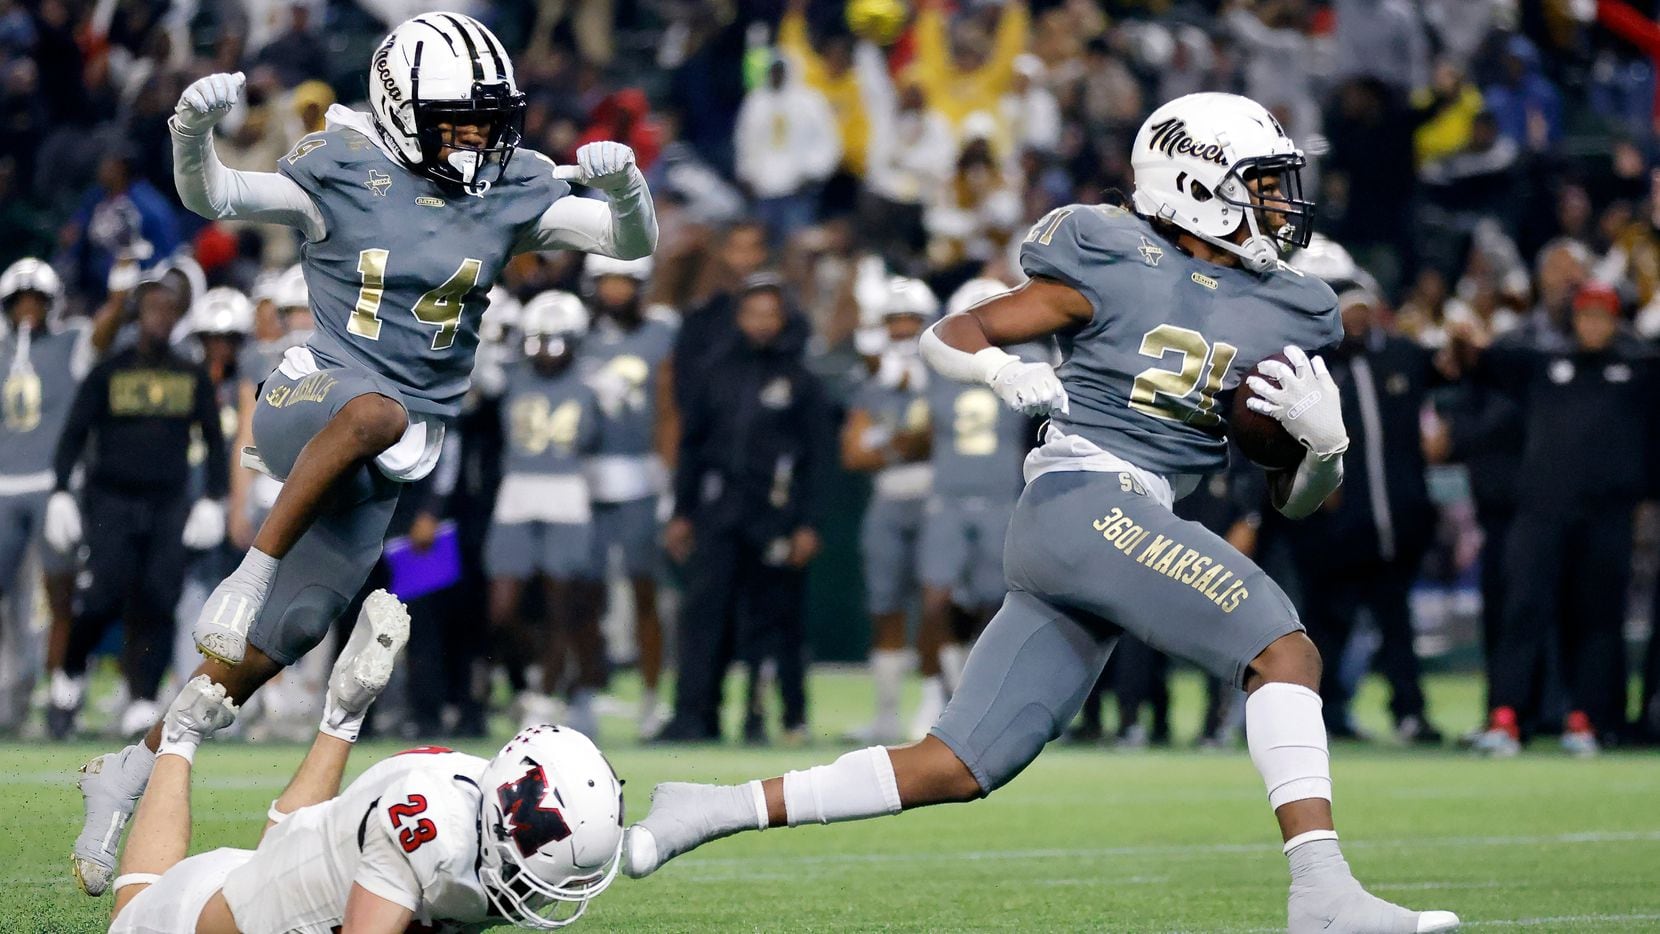 South Oak Cliff running back Danny Green (21) races to the end zone for the go-ahead score...